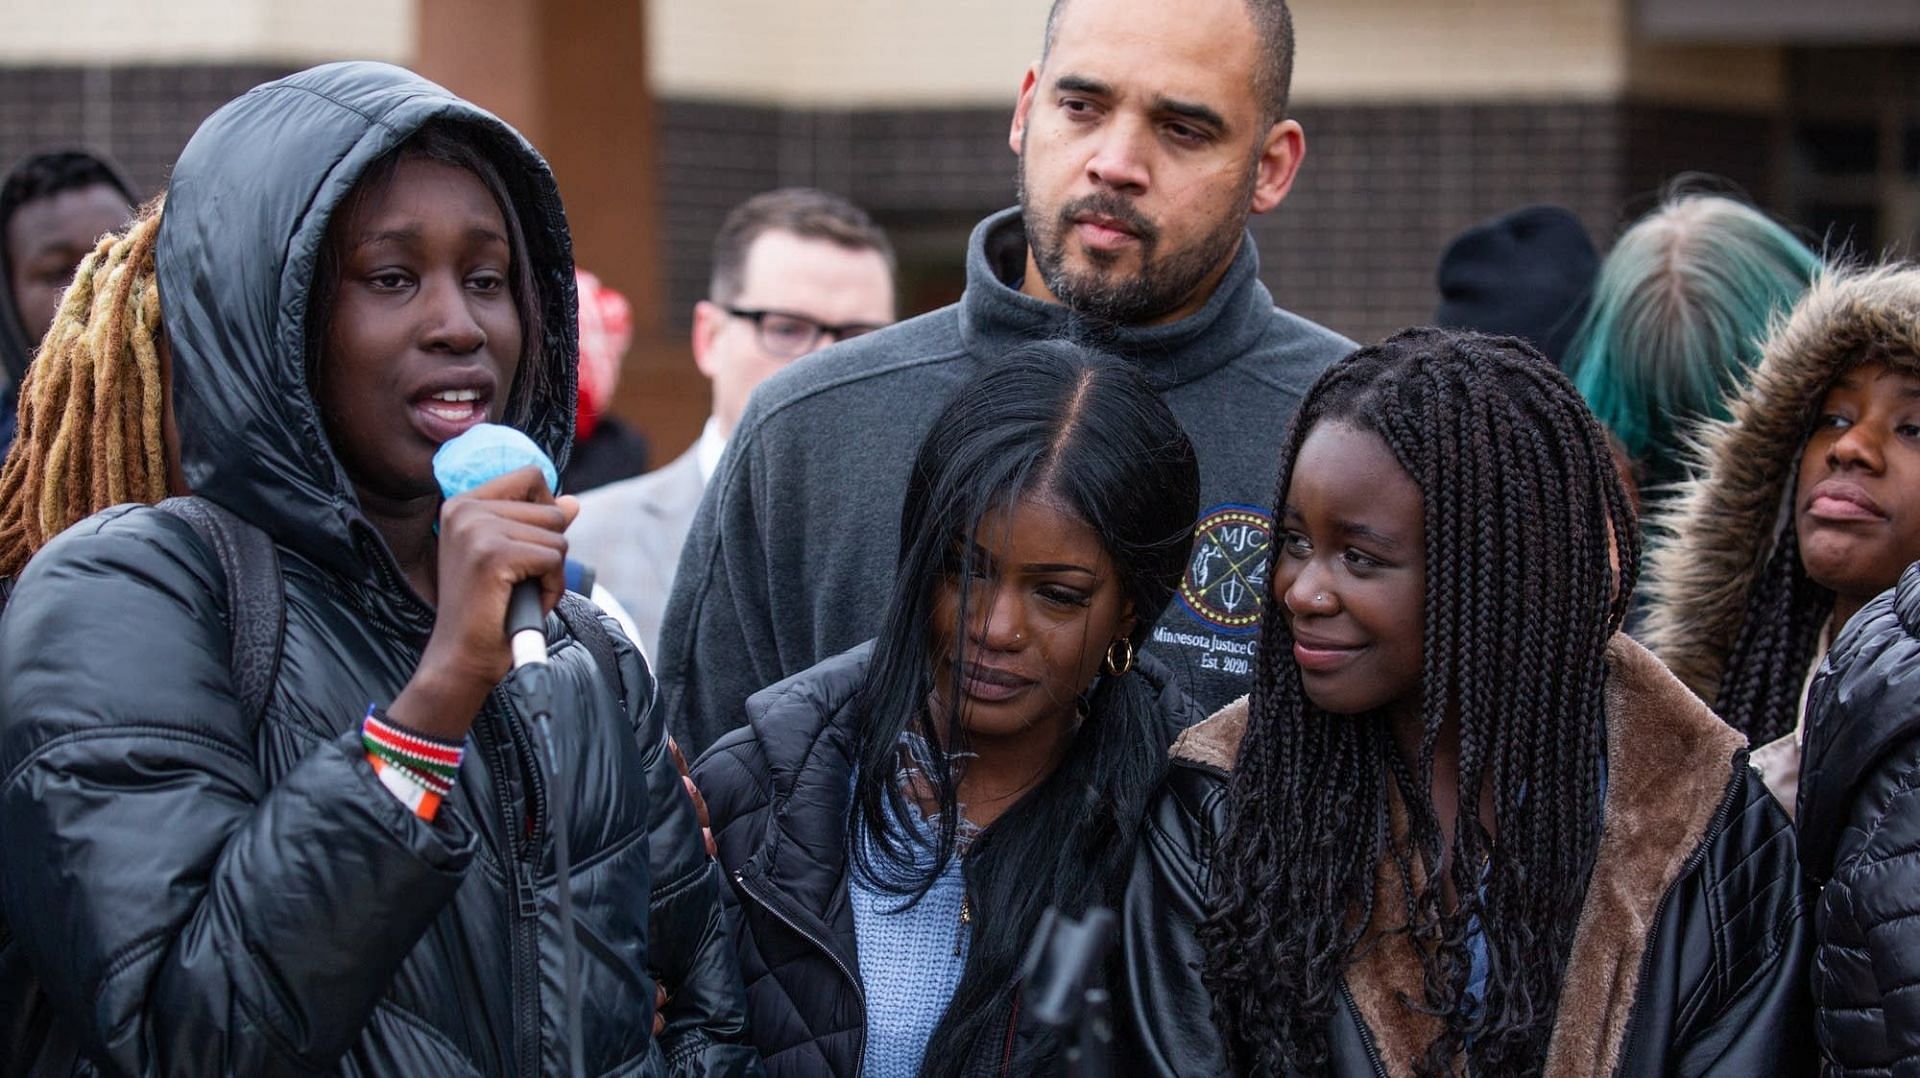 Prior Lake High School student Nya Sigin issues statement after racist video is posted against her. Nya seen far right in the above image. (Image via MPR News)